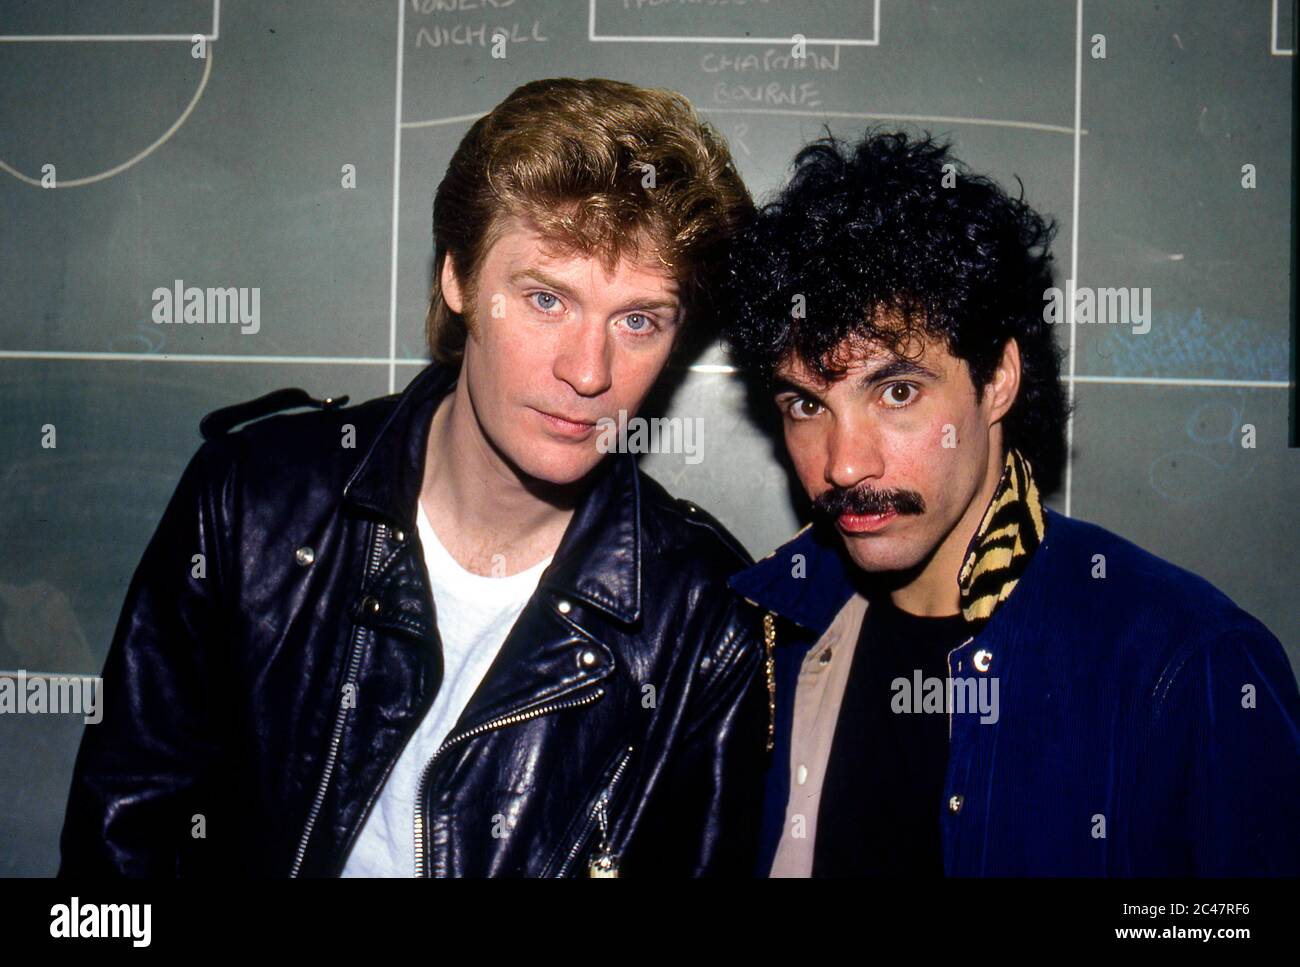 Hall & Oates: Left Darryl Hall with John Oates in San Diego 1982 Stock ...